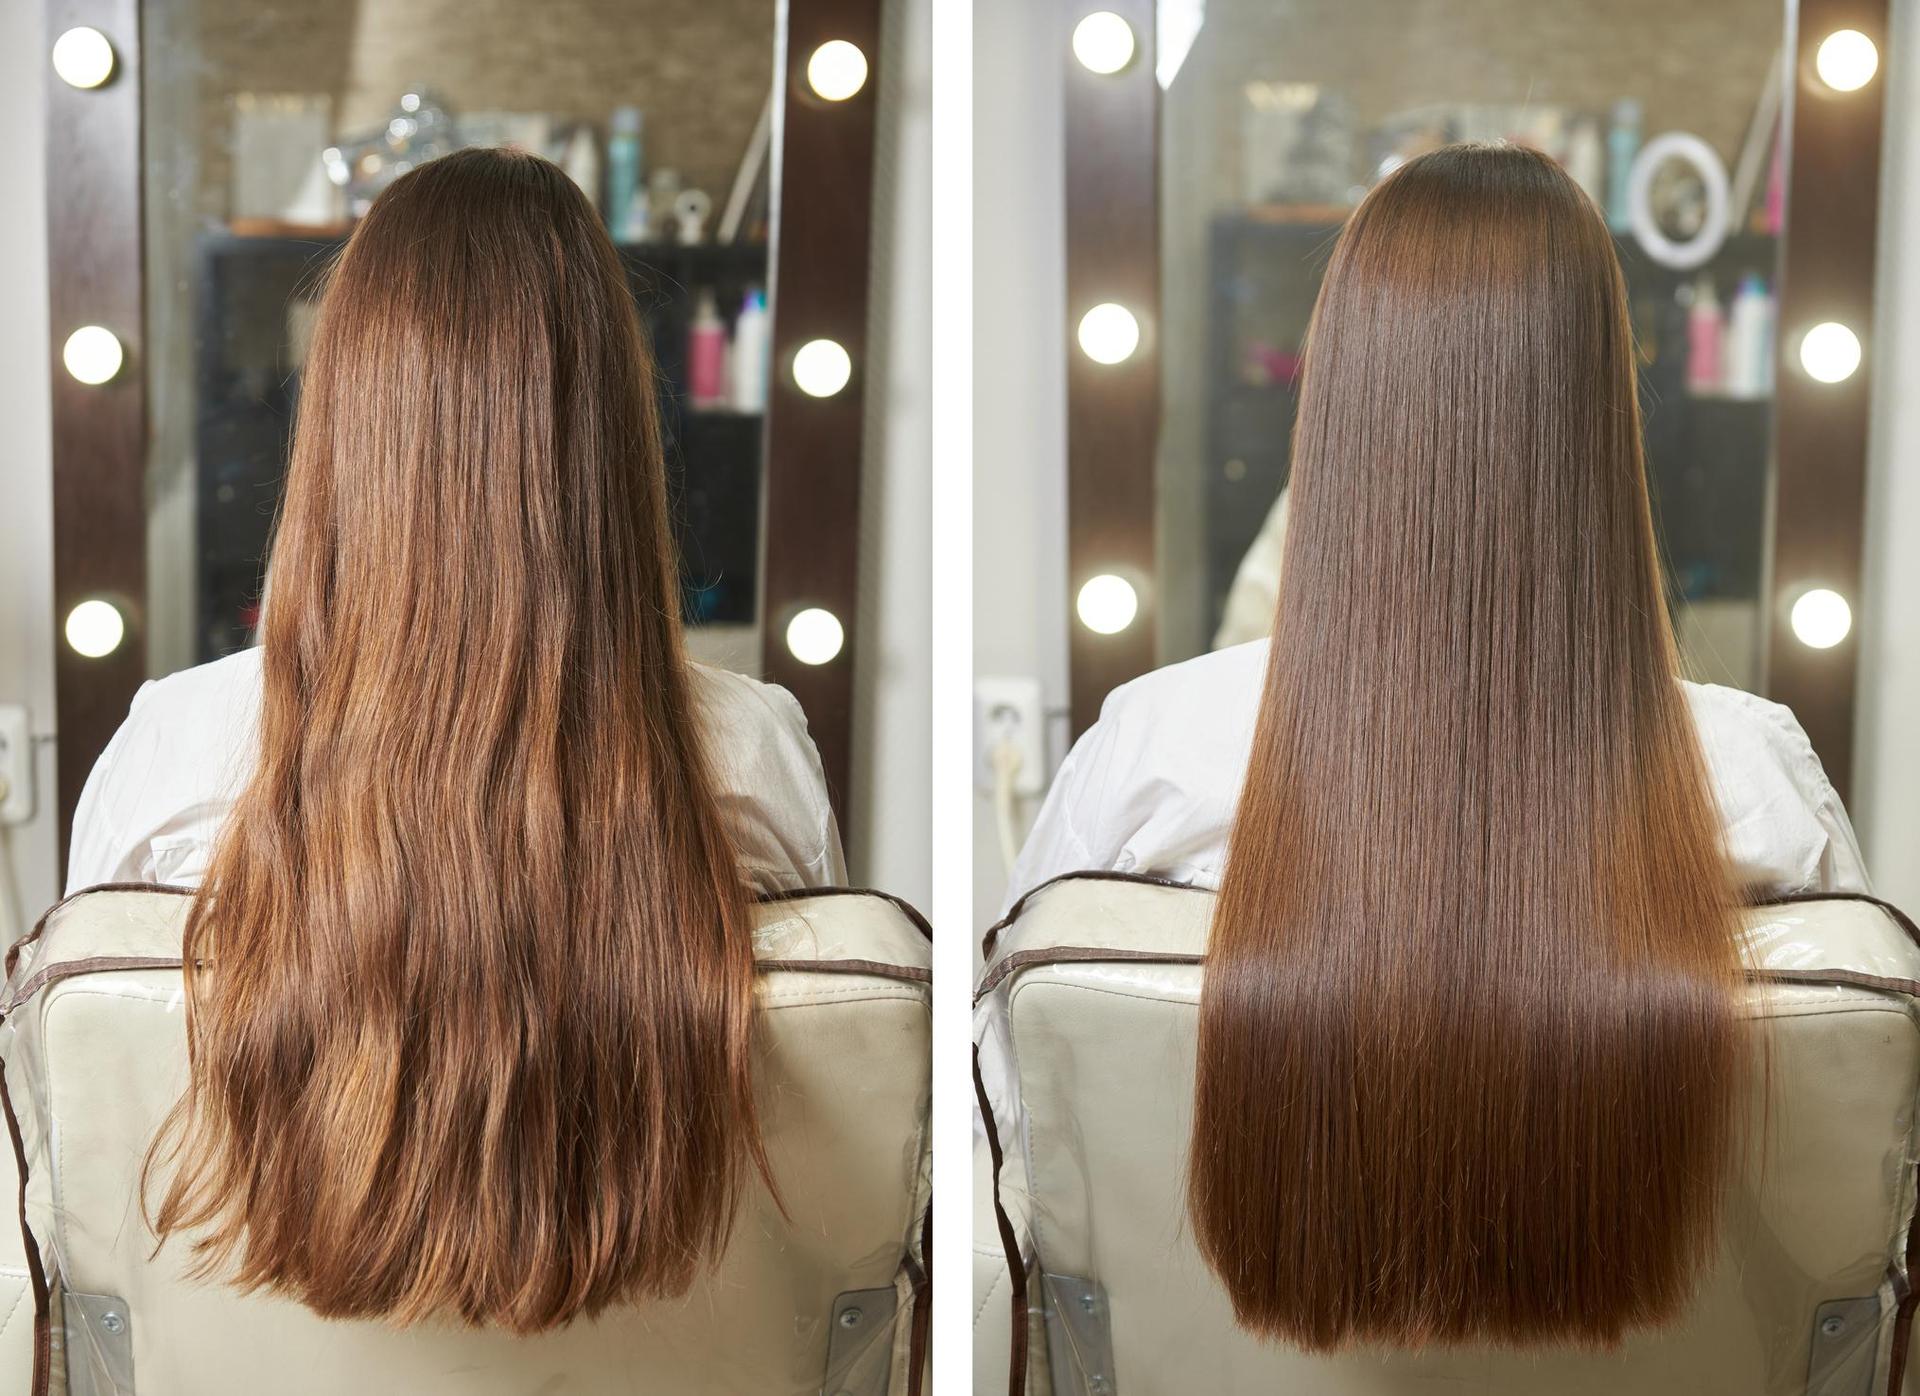 Apply to hair for 15 minutes.  It costs pennies, but it gives the effect of lamination from a salon